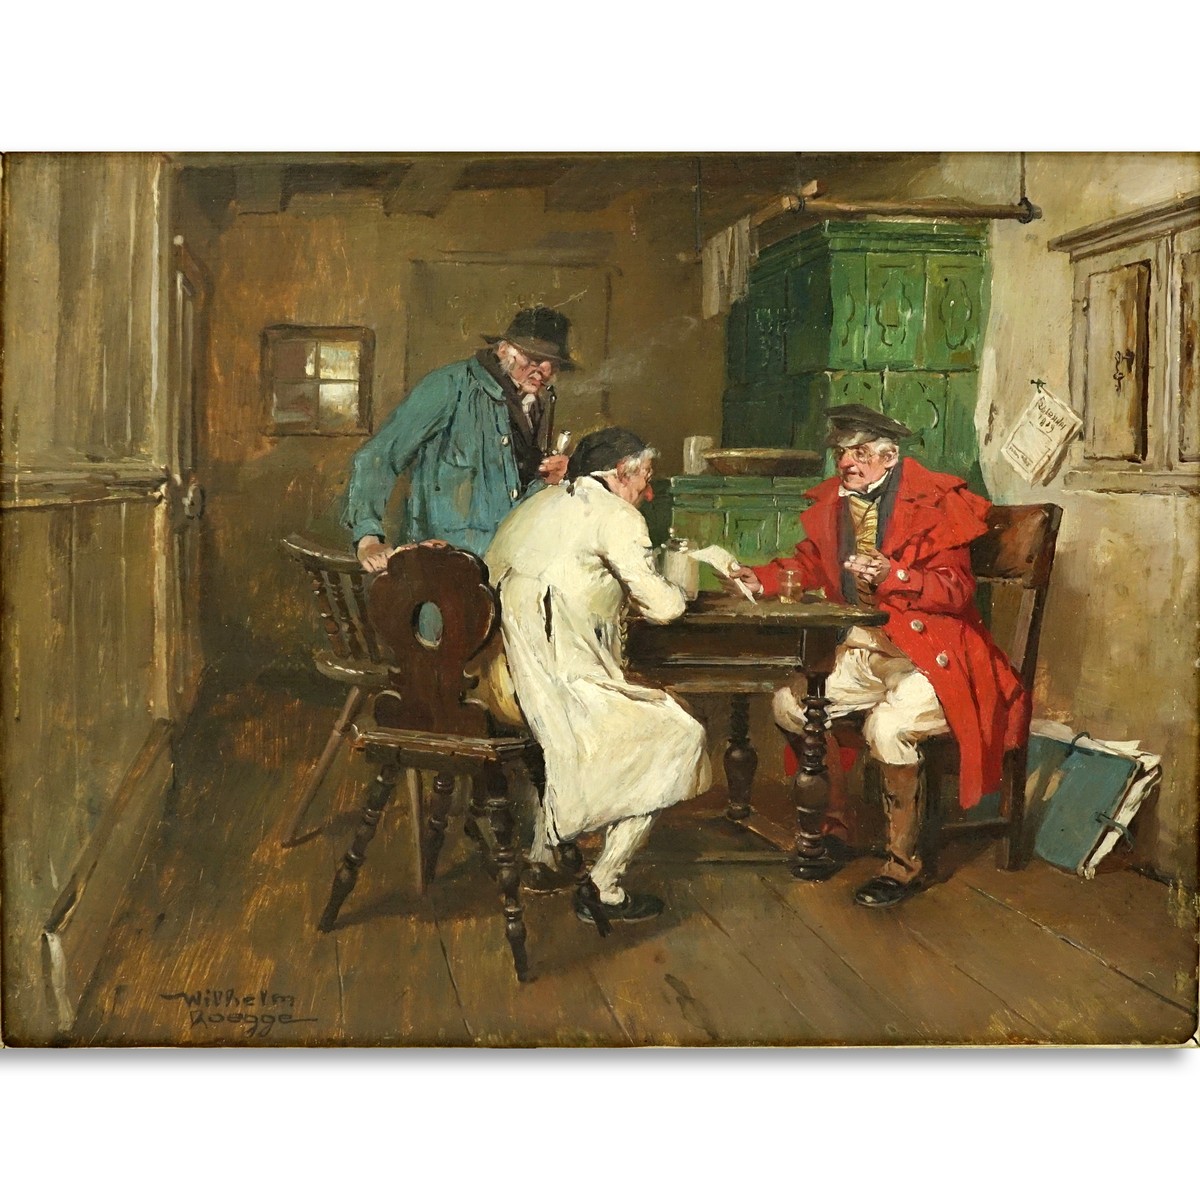 Wilhelm Roegge I, German  (1829 - 1908) Oil on Board, Interior Scene with Figures, Signed Lower Left. Tag with artist name and date attached to frame.